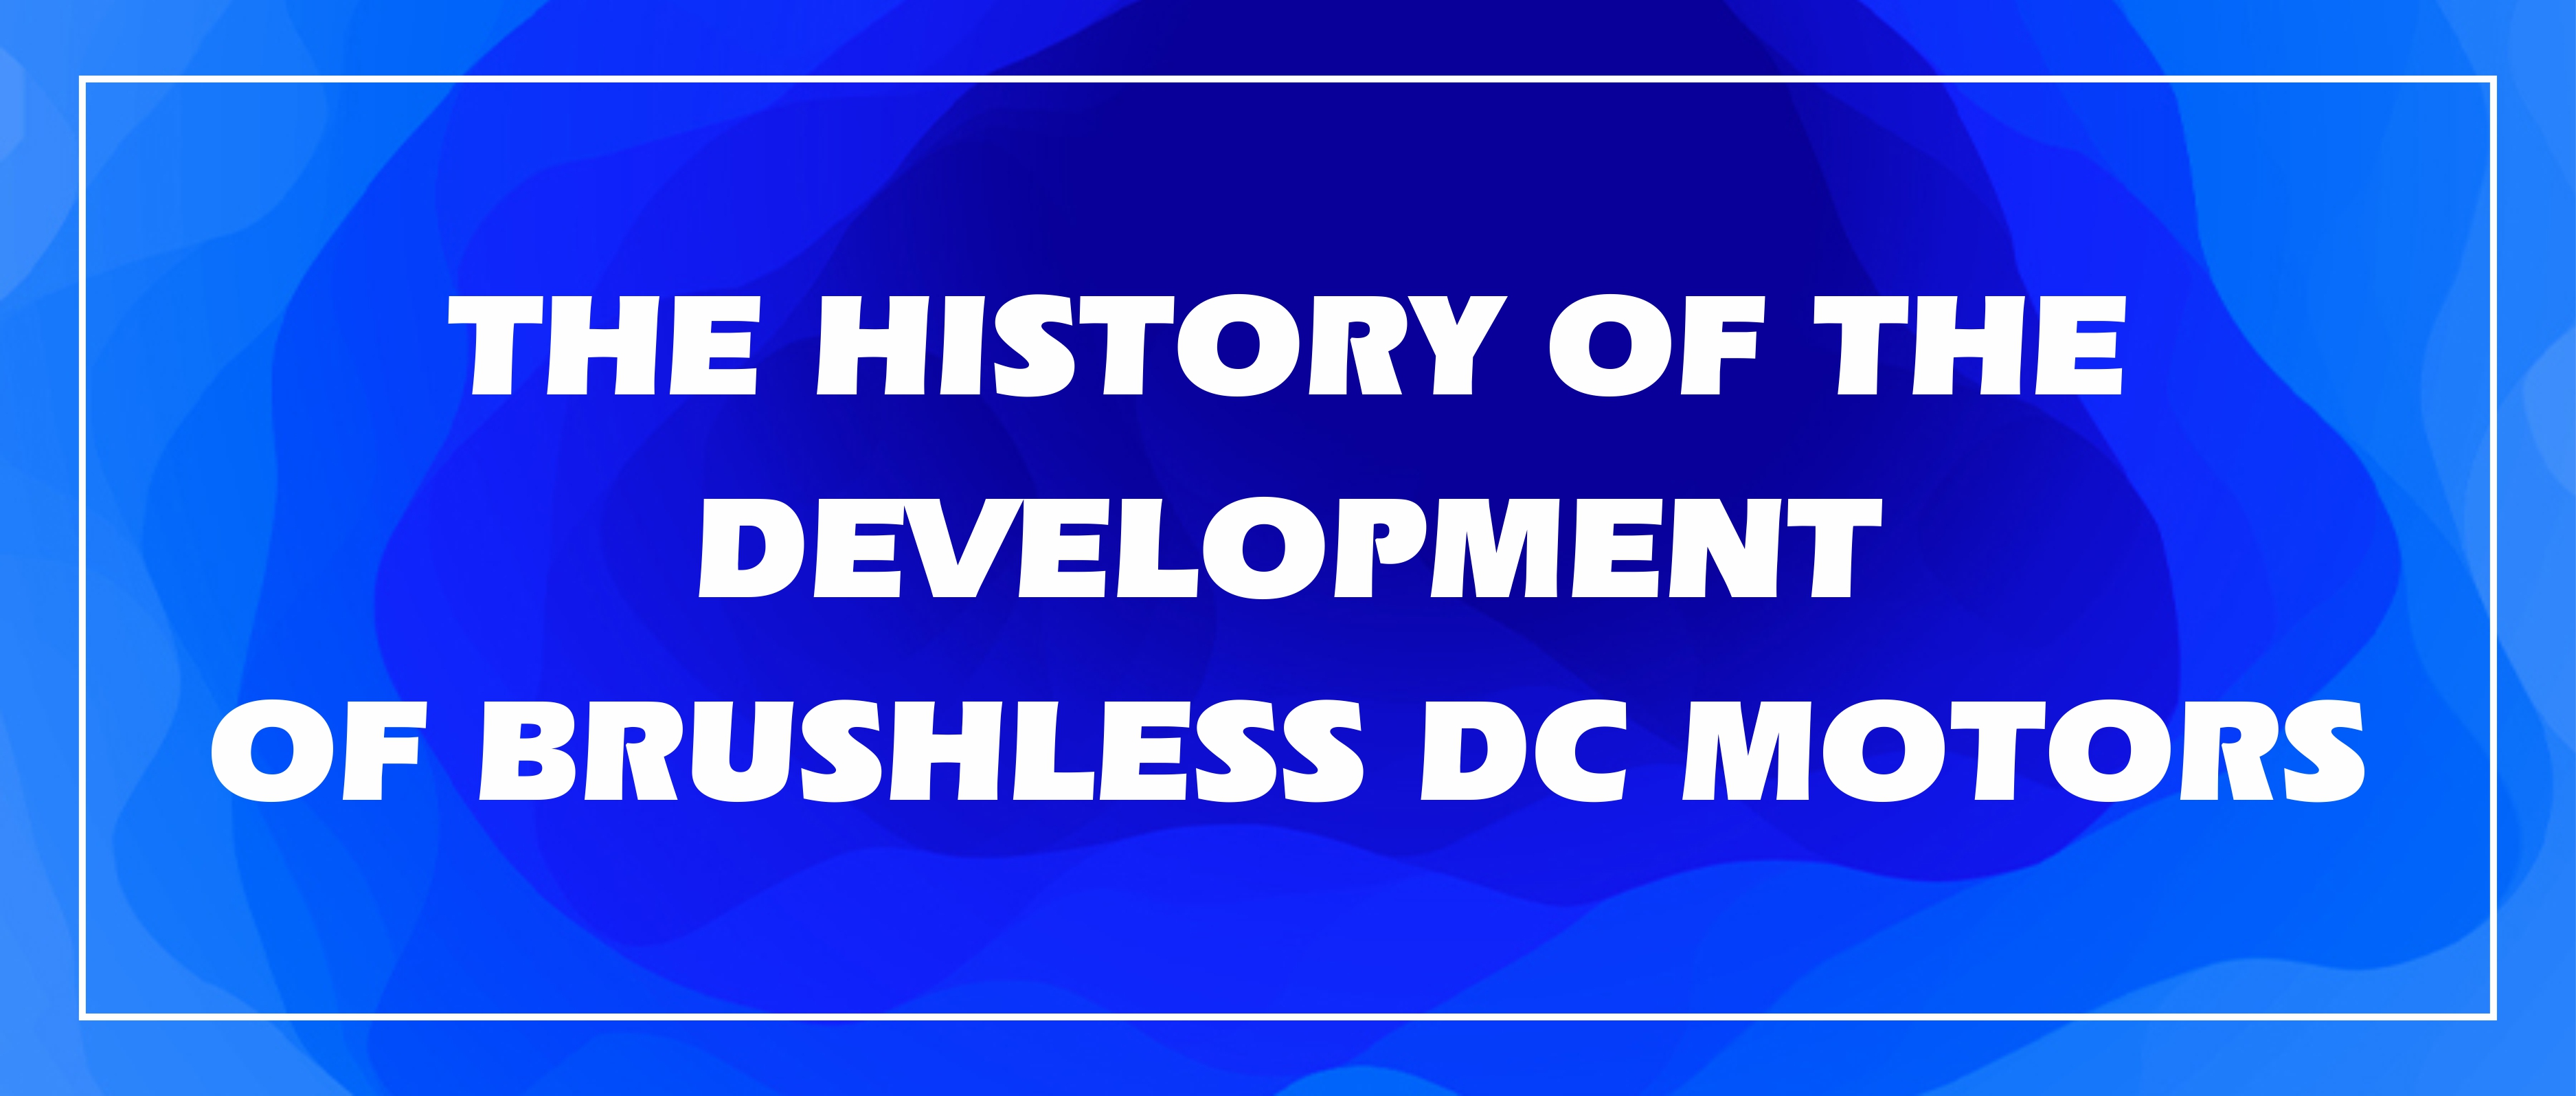 The history of the development of brushless DC motors